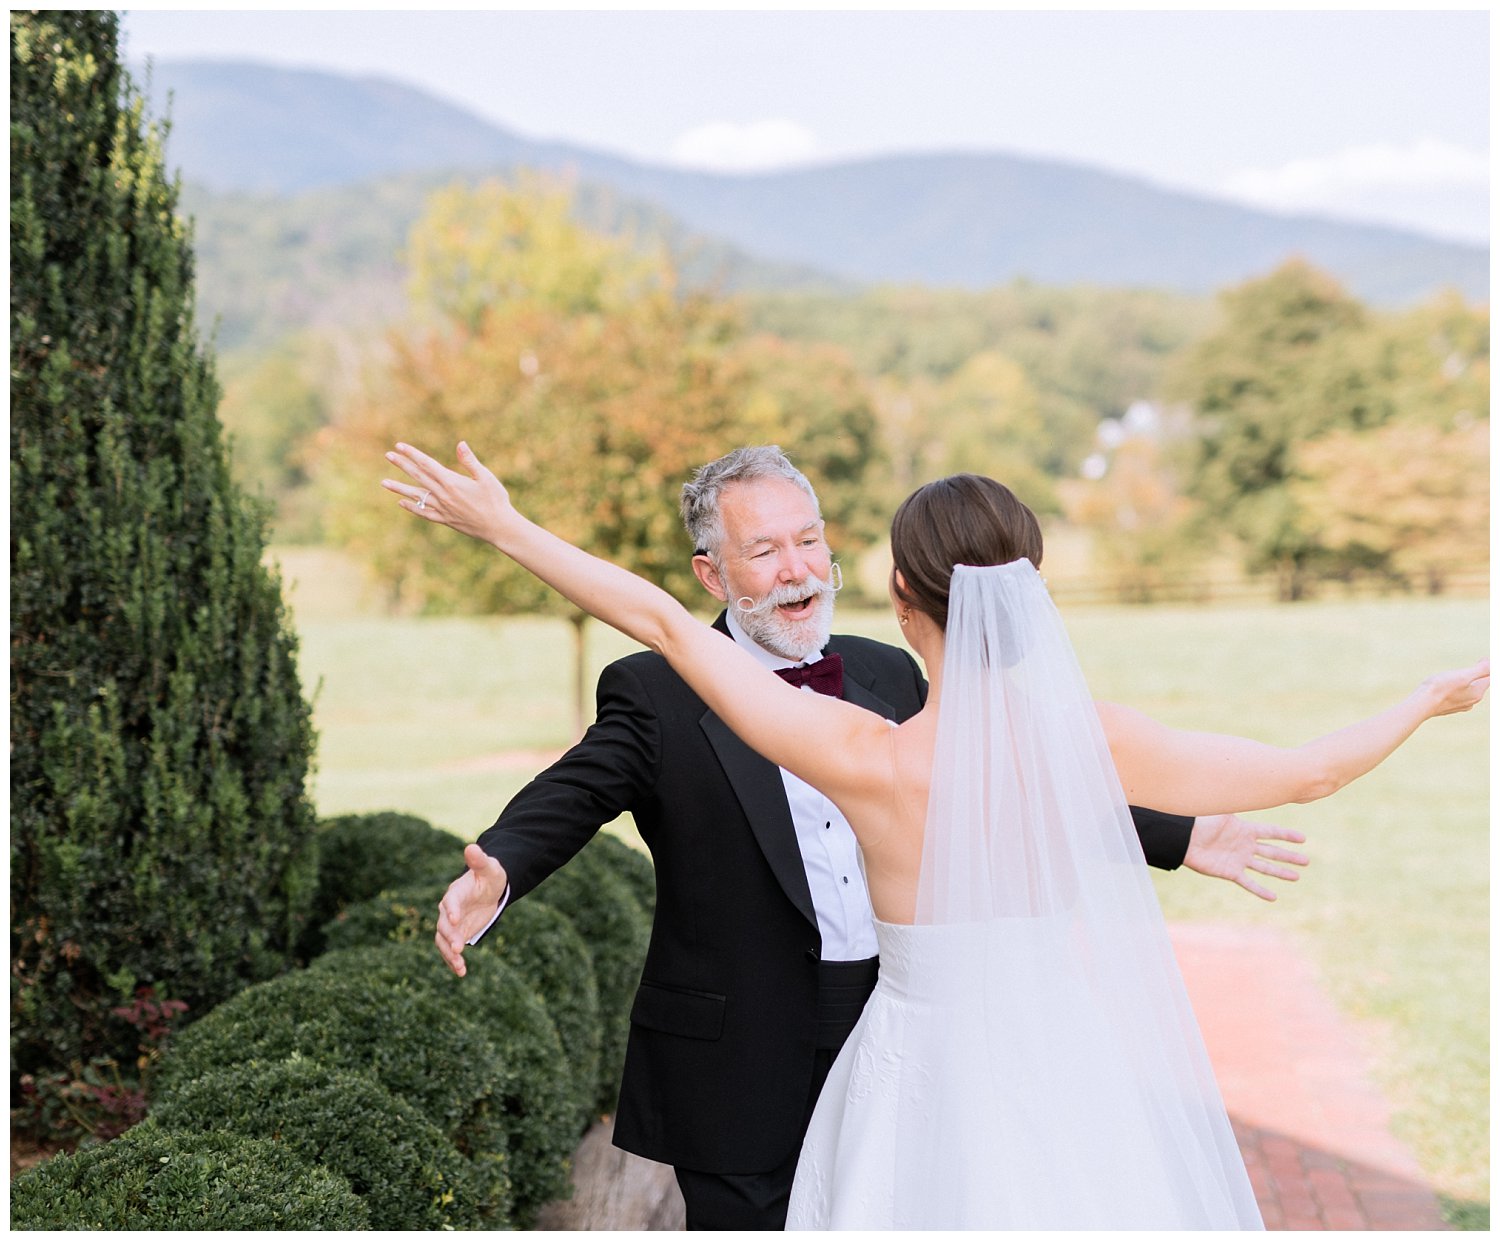 Bridal reveal with her dad at King Family Vineyard wedding